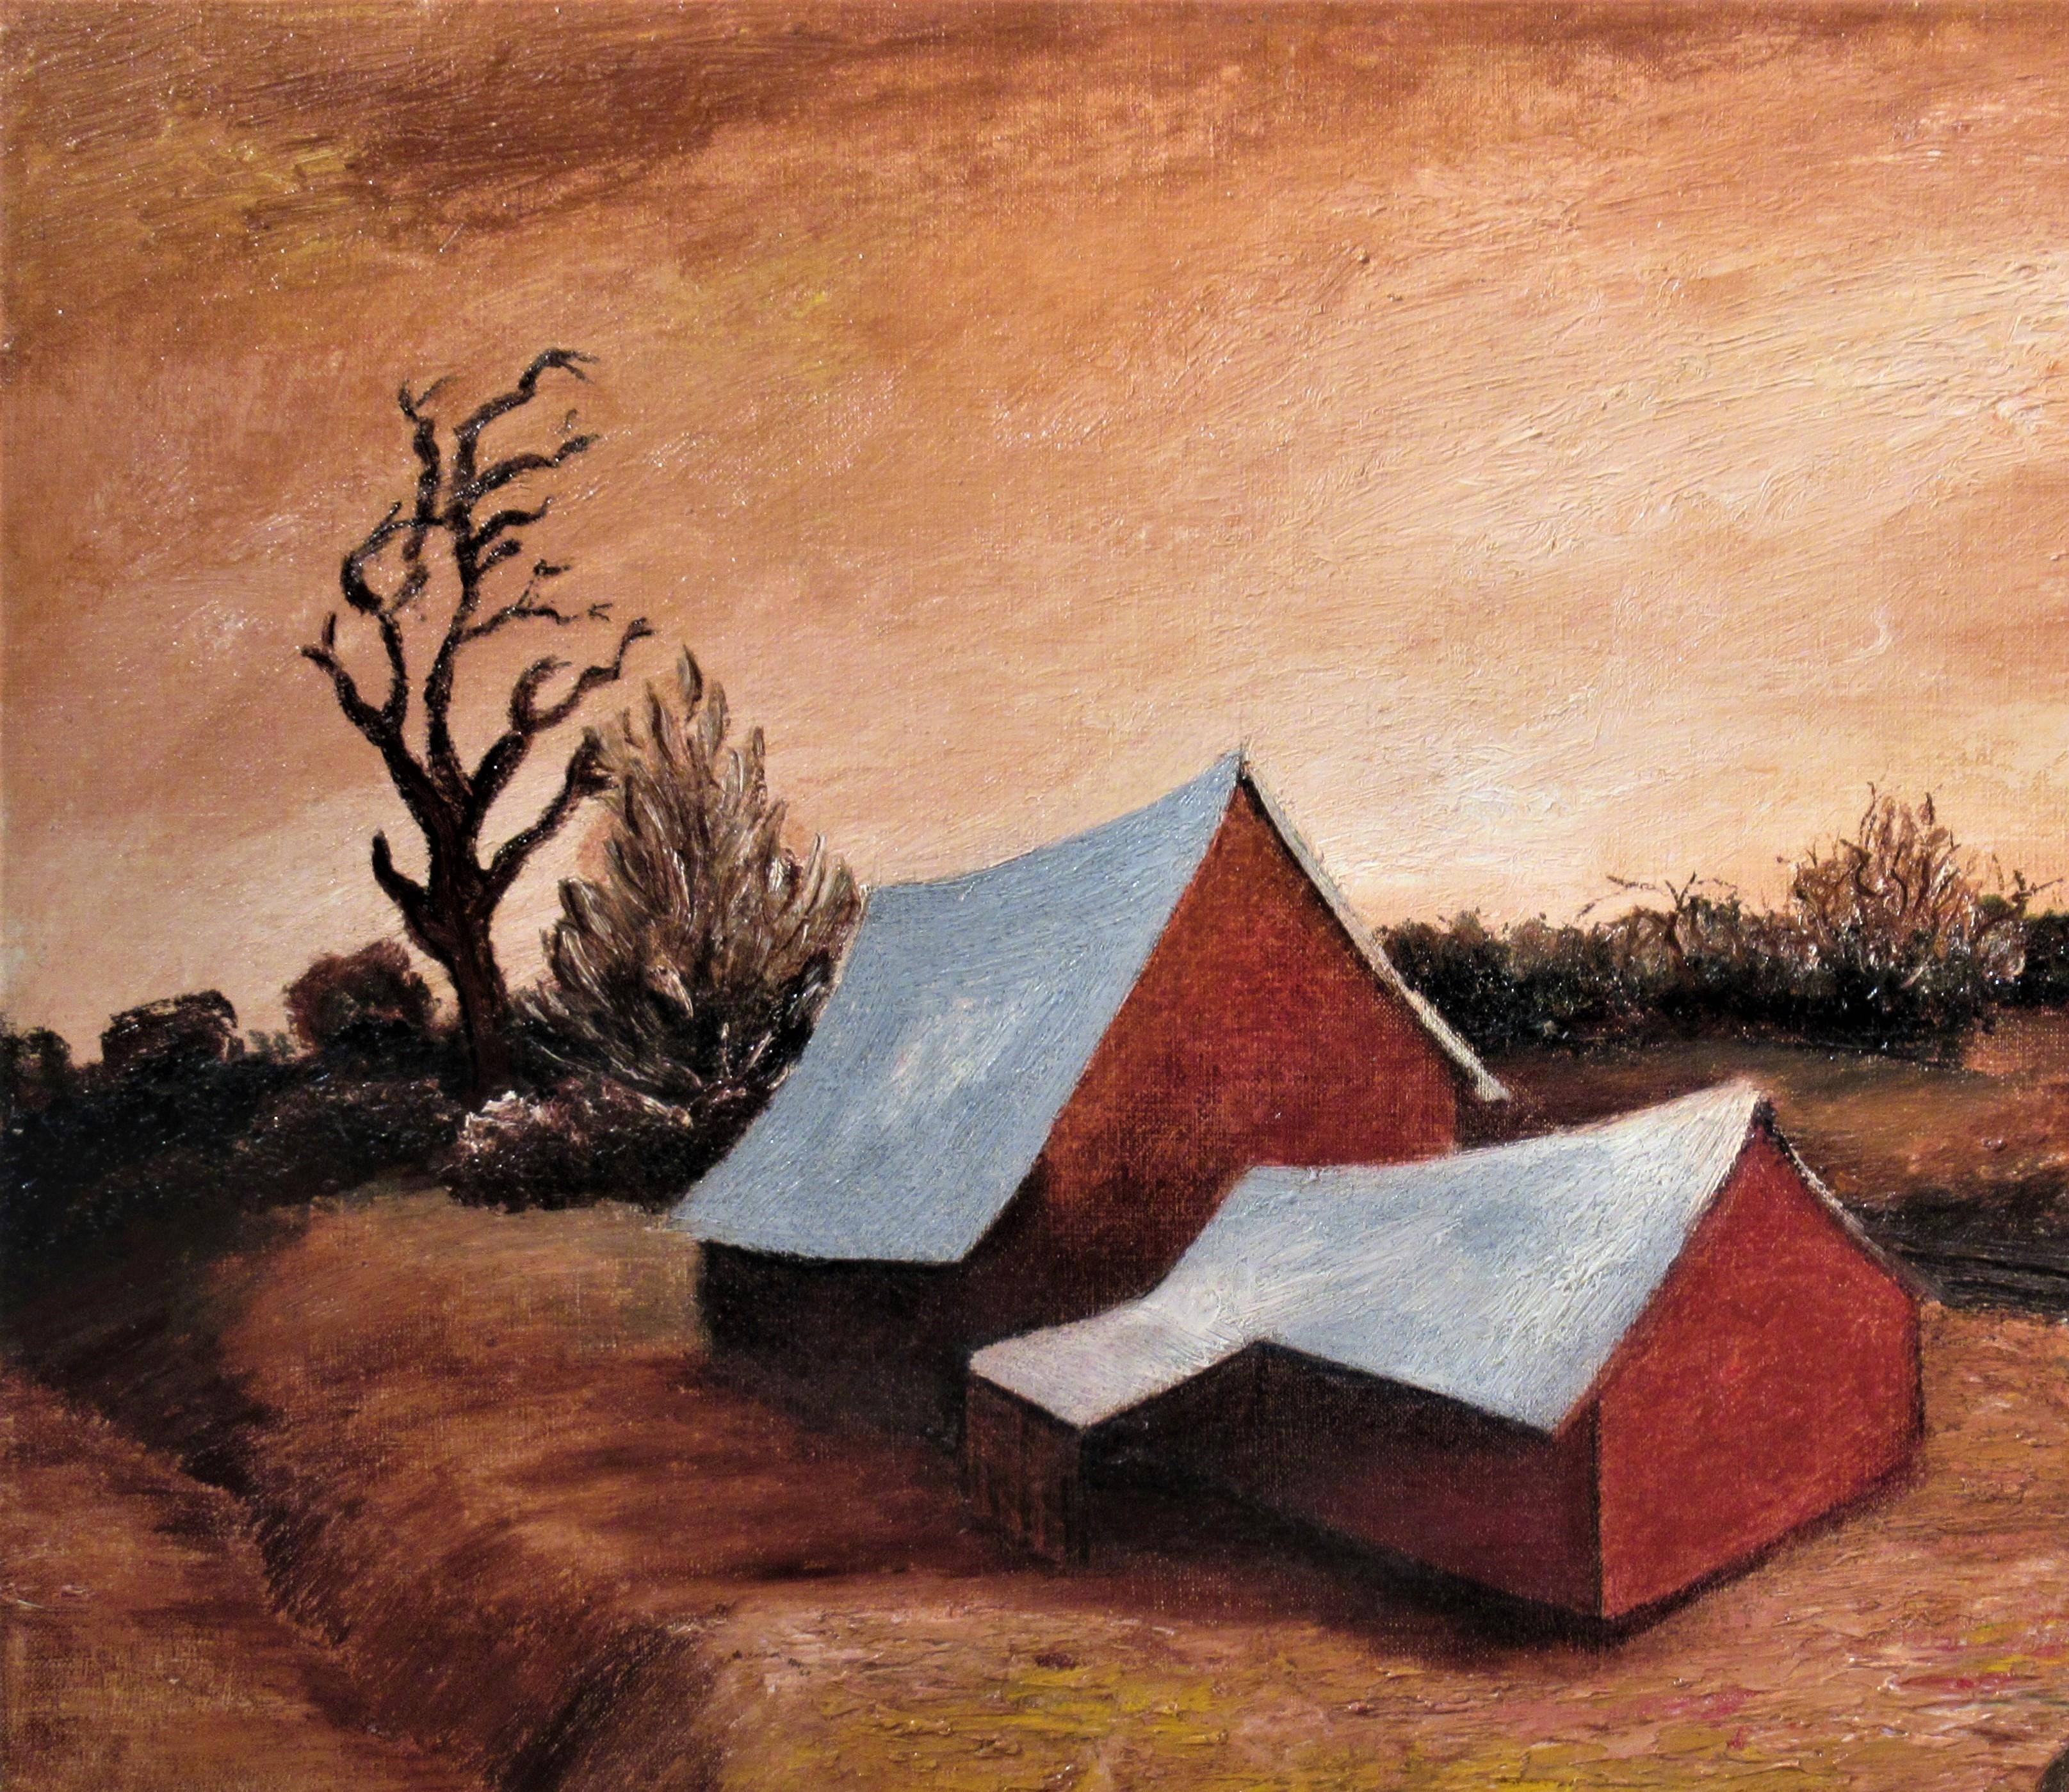 Red Houses - Painting by Judson Reynolds Briggs